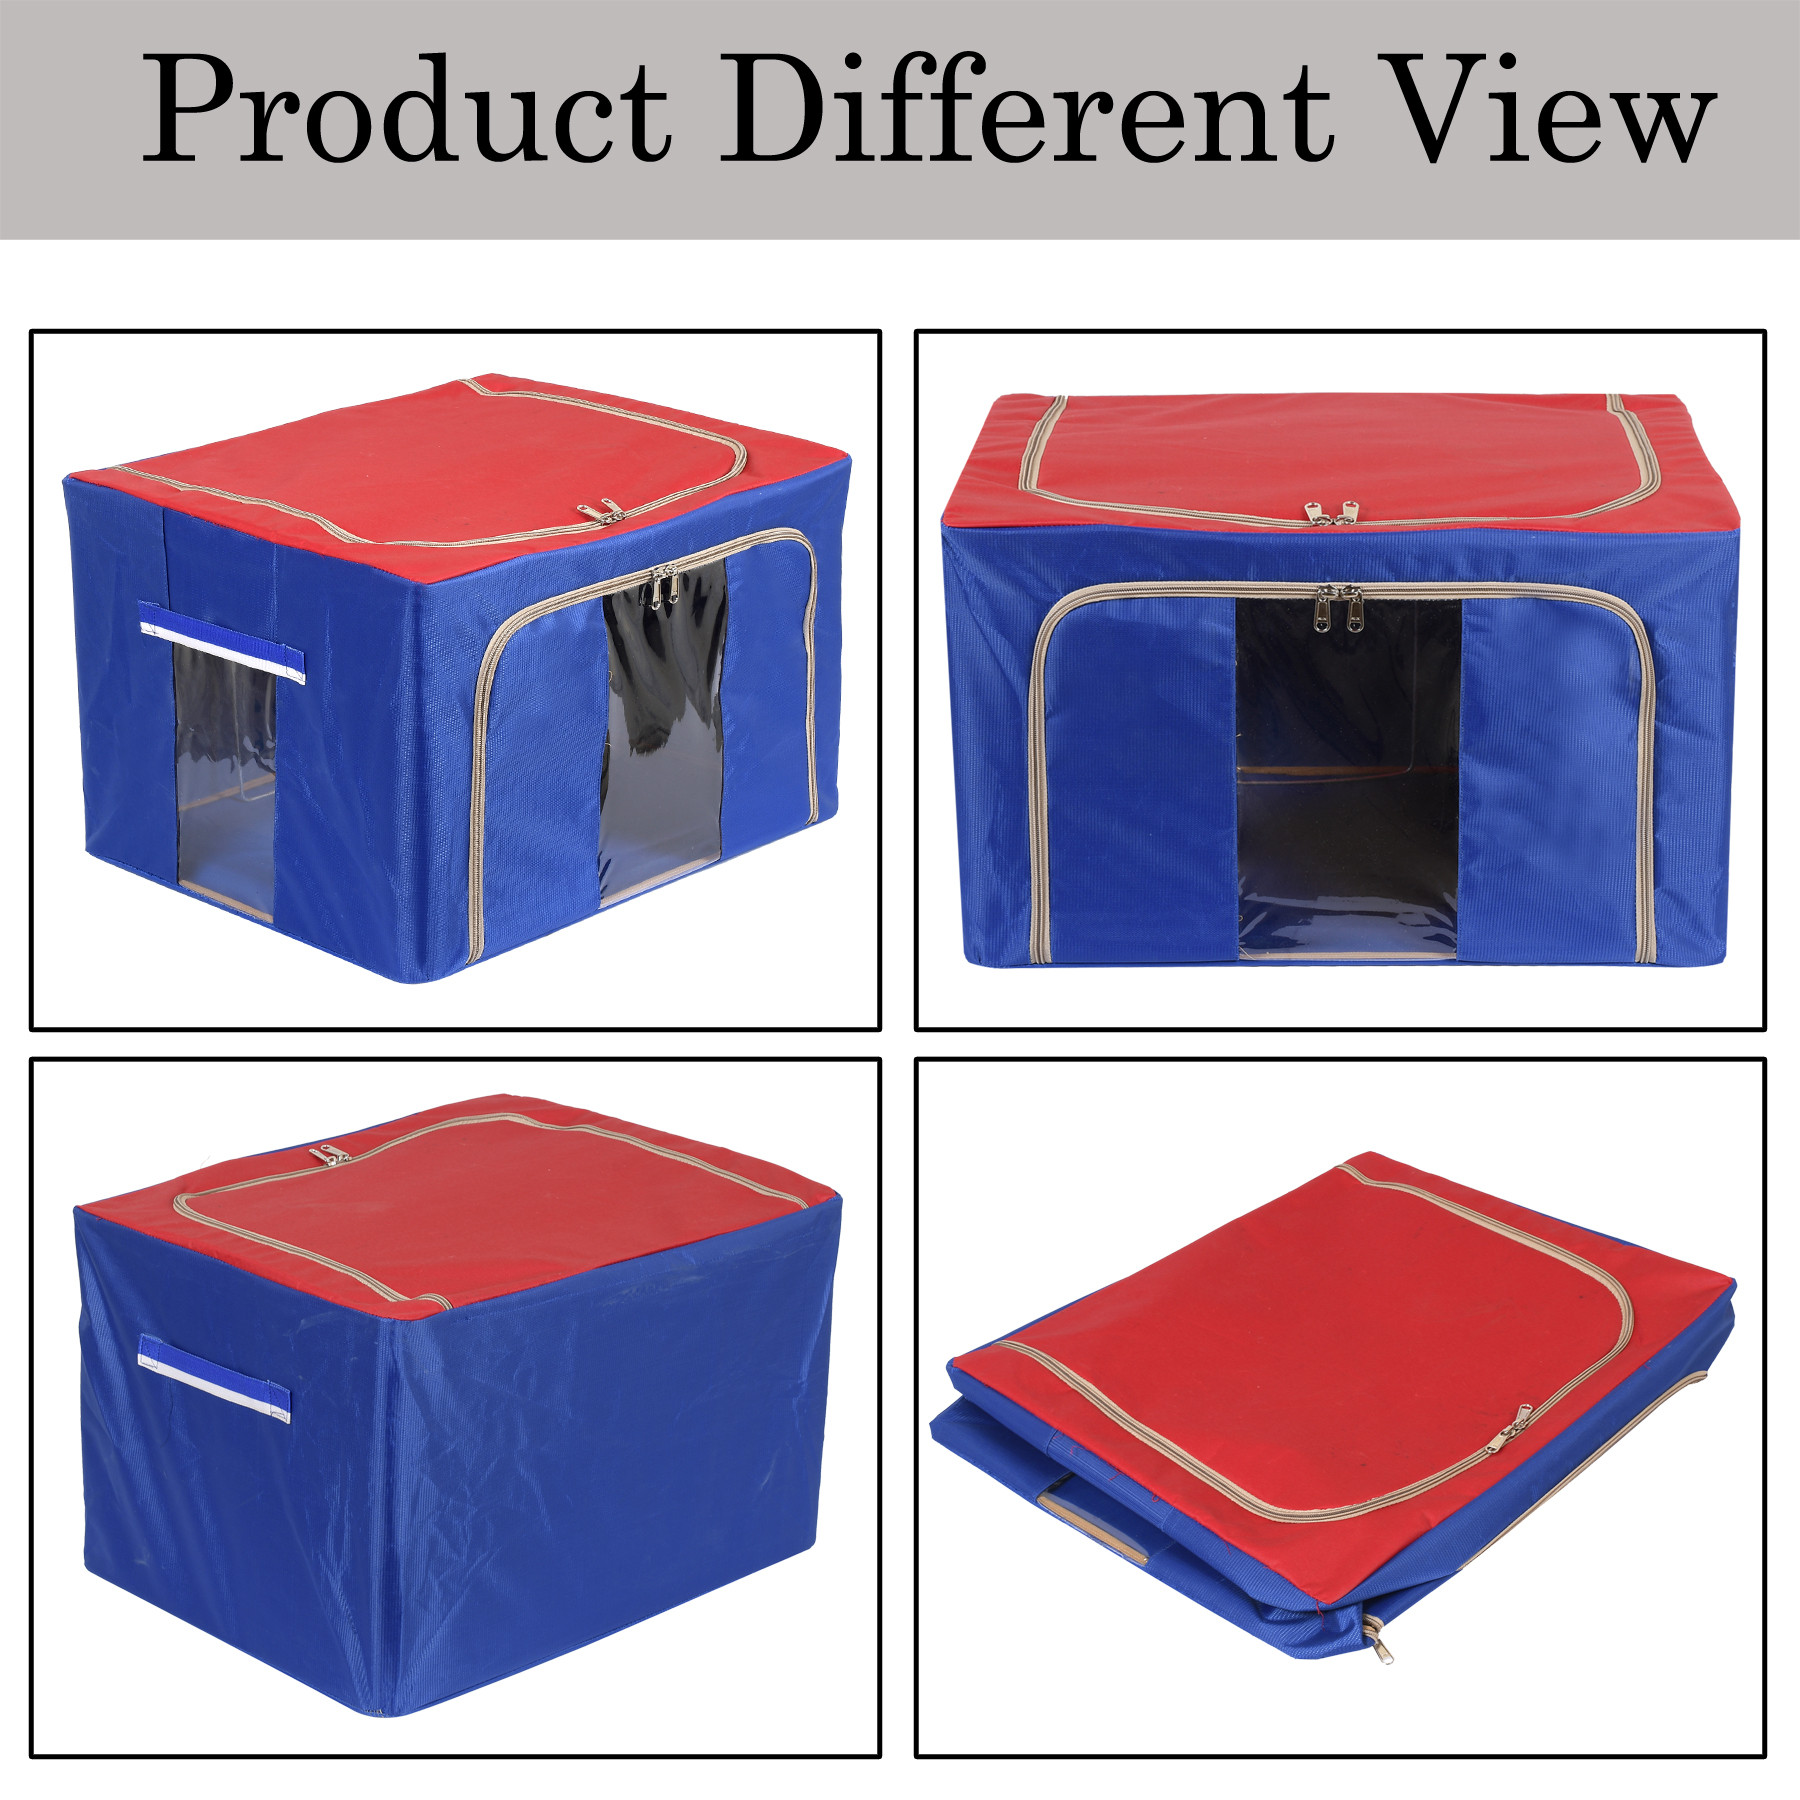 Kuber Industries Steel Frame Storage Box/Organizer For Clothing, Blankets, Bedding With Clear Window, 88Ltr. (Red & Blue)-44KM0321